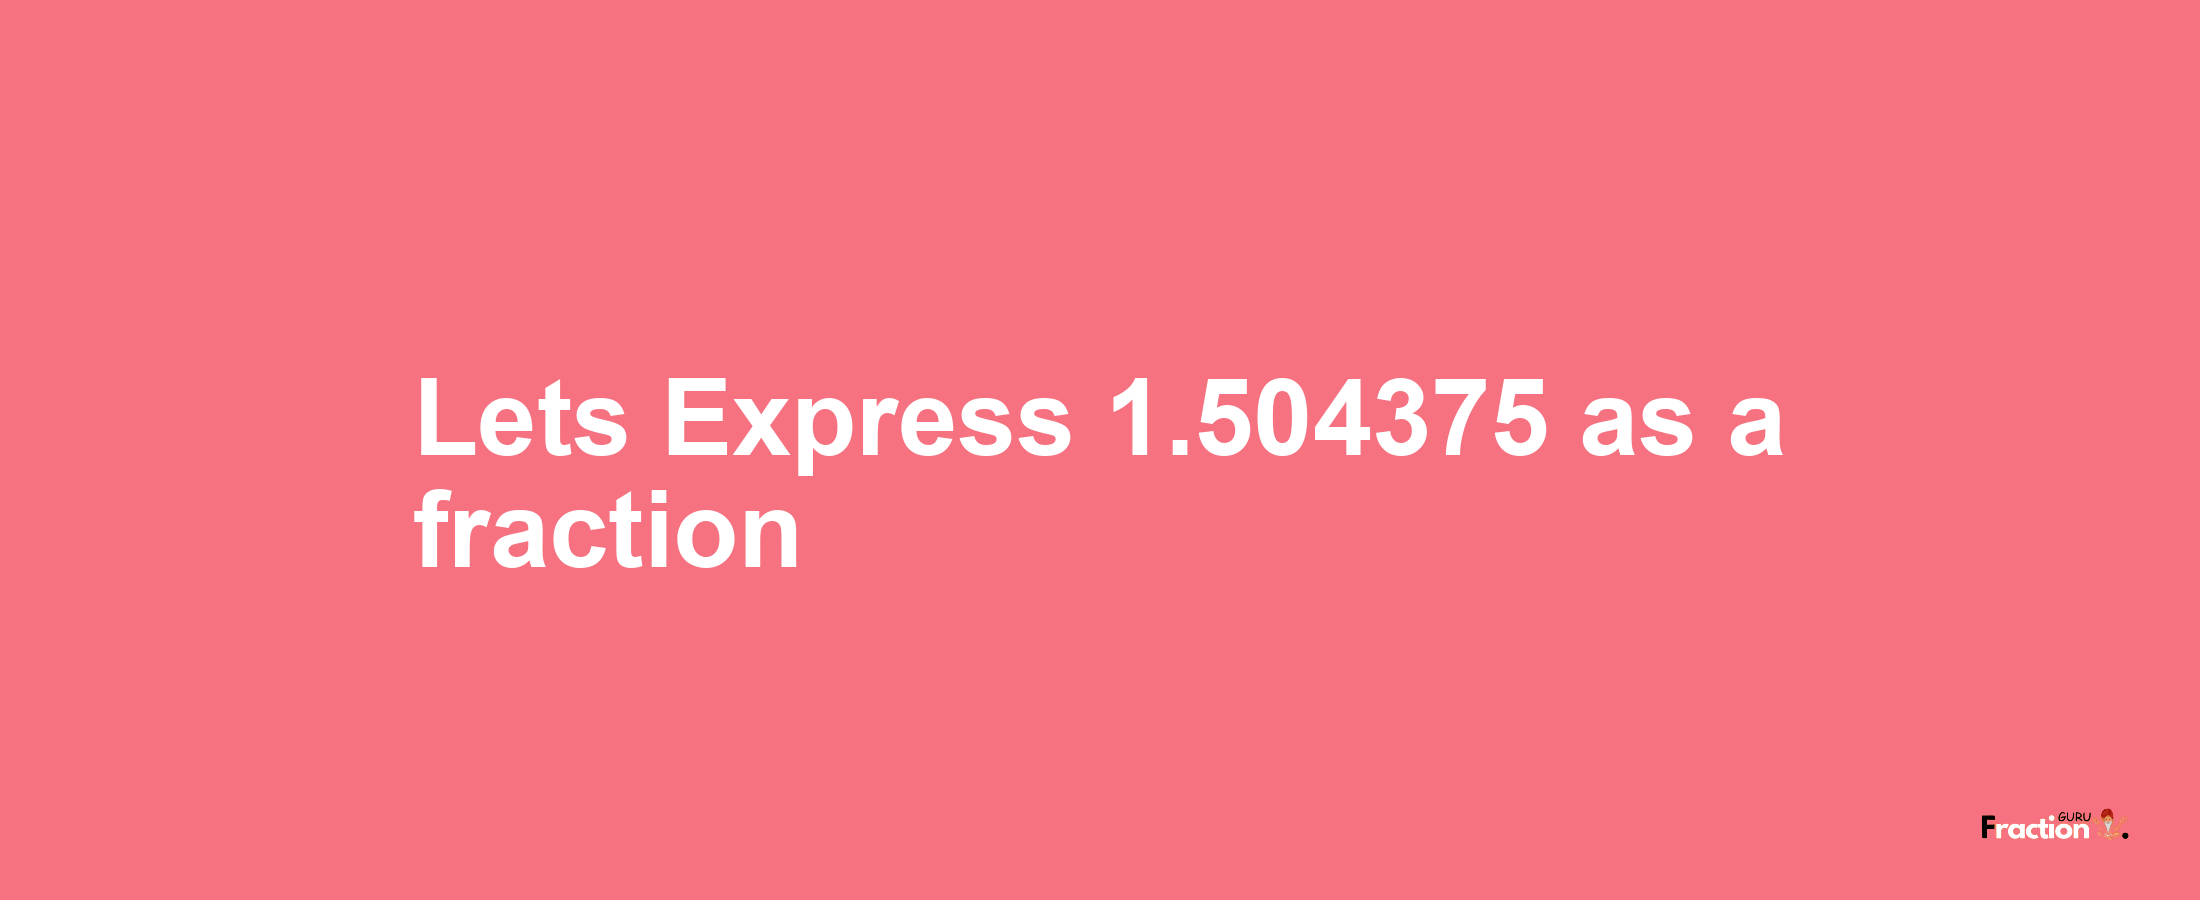 Lets Express 1.504375 as afraction